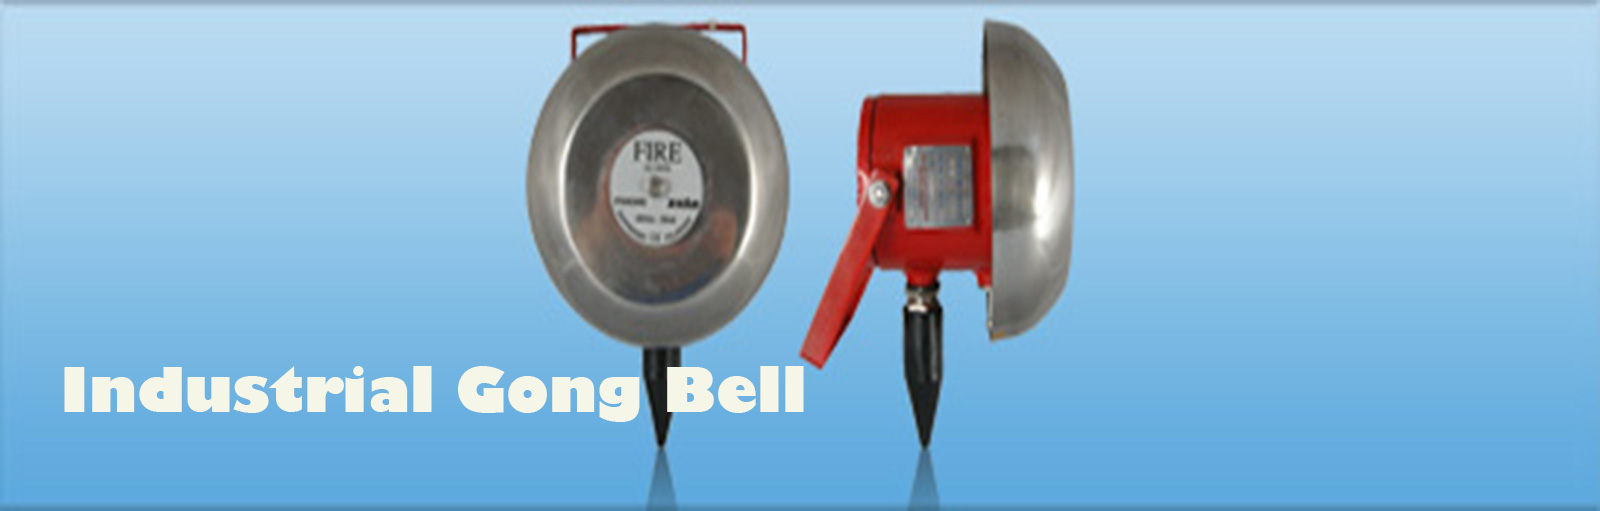 Industrail Gong Bell